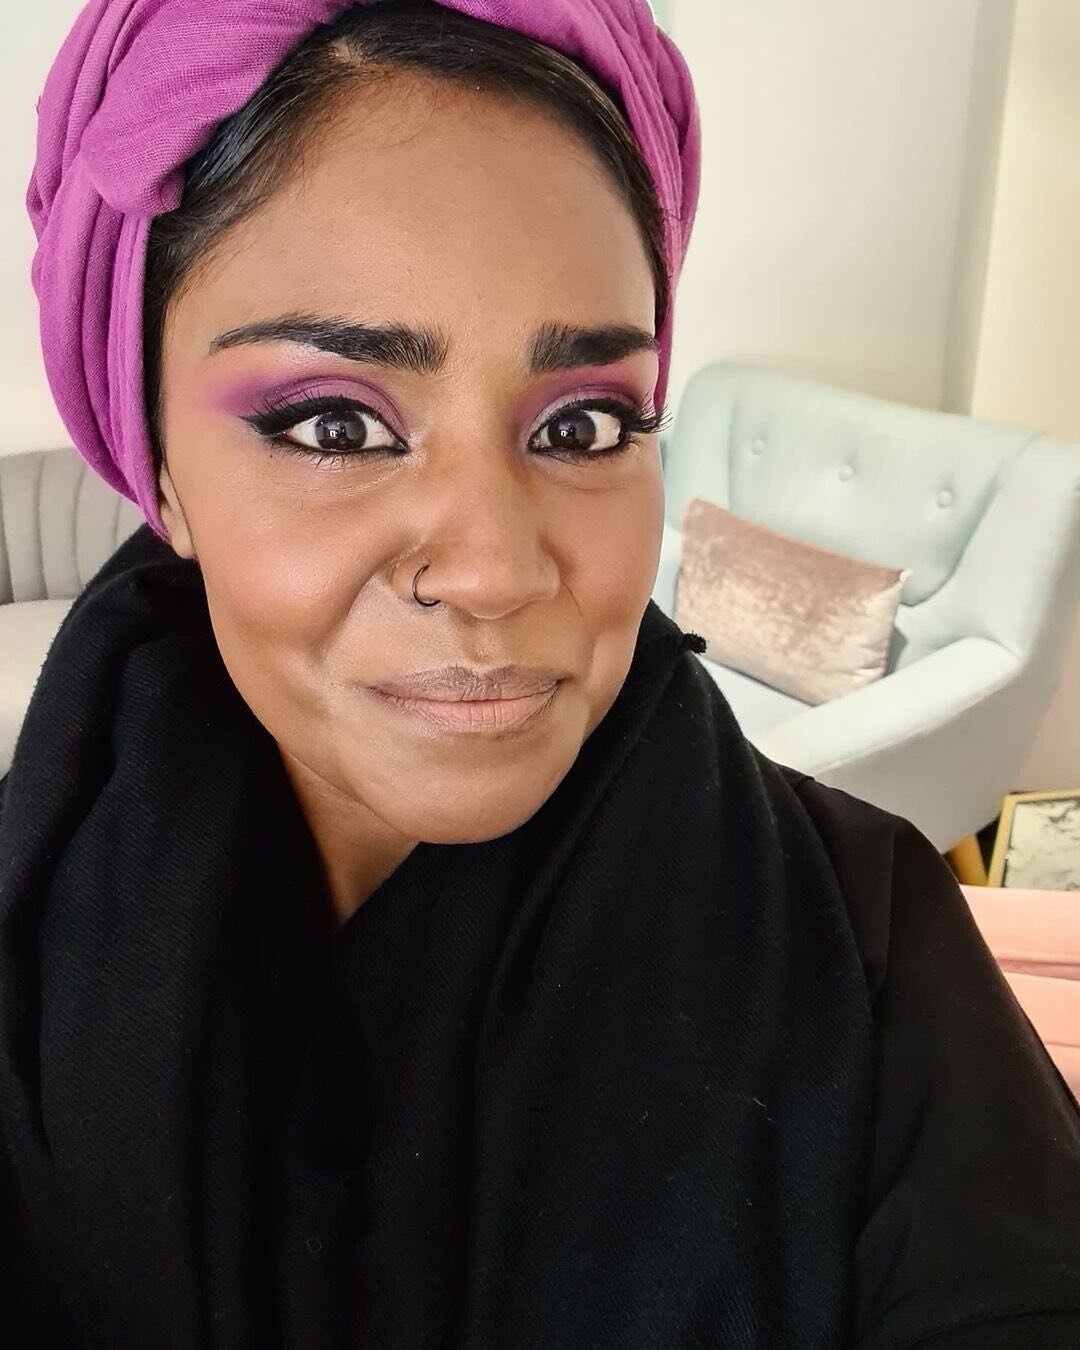 Go bold we said! 😍
Let&rsquo;s face it, we are all a bit fed up. This year has been tough to say the least, so we thought let&rsquo;s go for it and have a bit of fun! Whether you are a fan of make-up or not, there is no denying it is an amazing tool